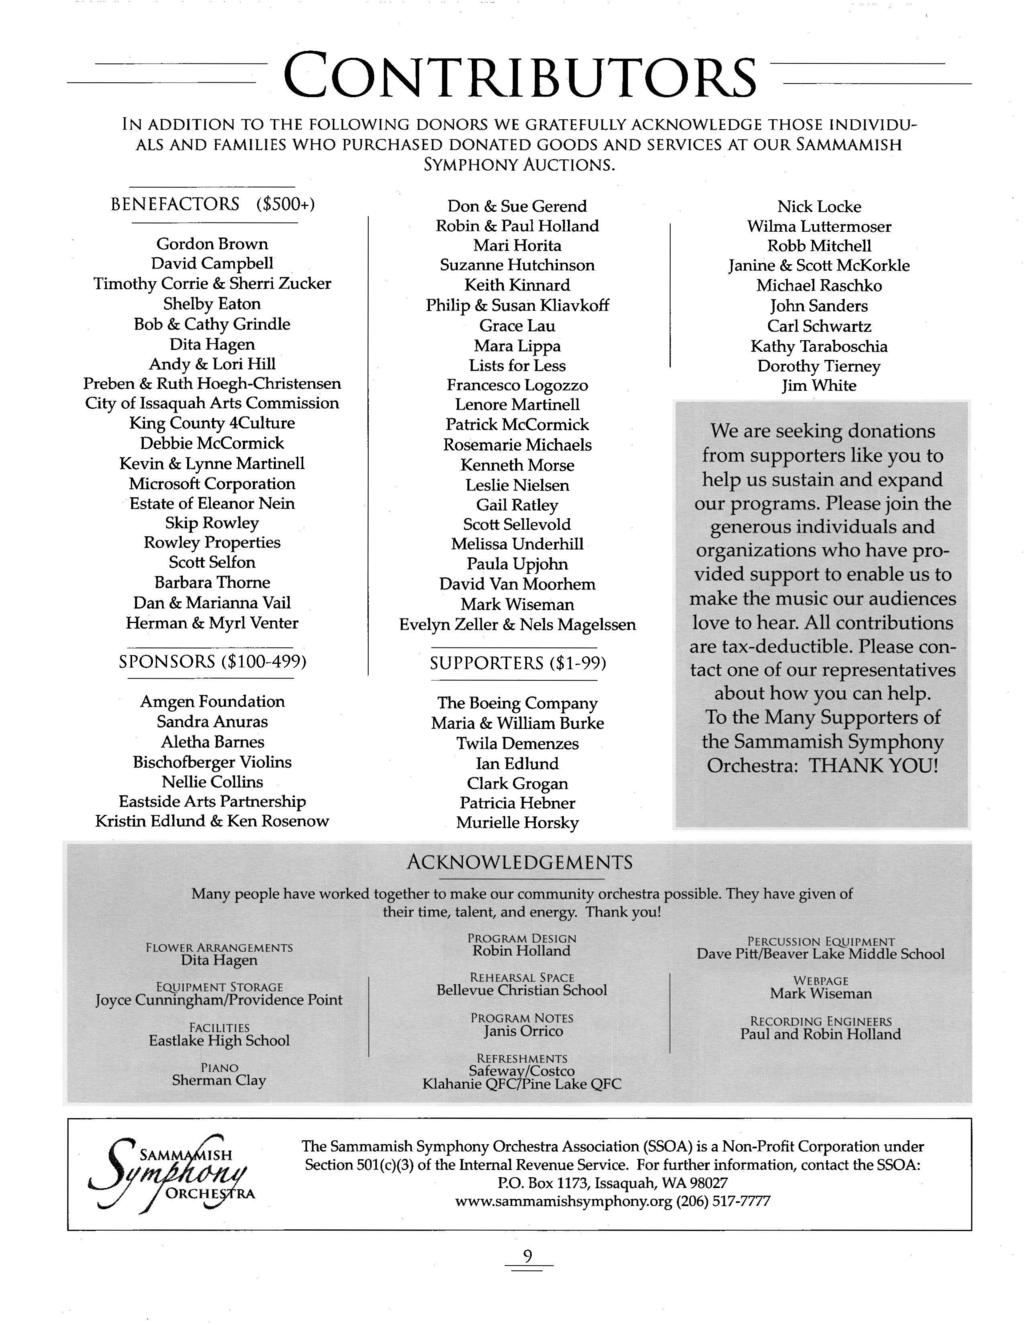 CONTRIBUTORS IN ADDITION TO THE FOLLOWING DONORS WE GRATEFULLY ACKNOWLEDGE THOSE INDIVIDU ALS AND FAMILIES WHO PURCHASED DONATED GOODS AND SERVICES AT OUR SAMMAMISH SYMPHONY AUCTIONS.